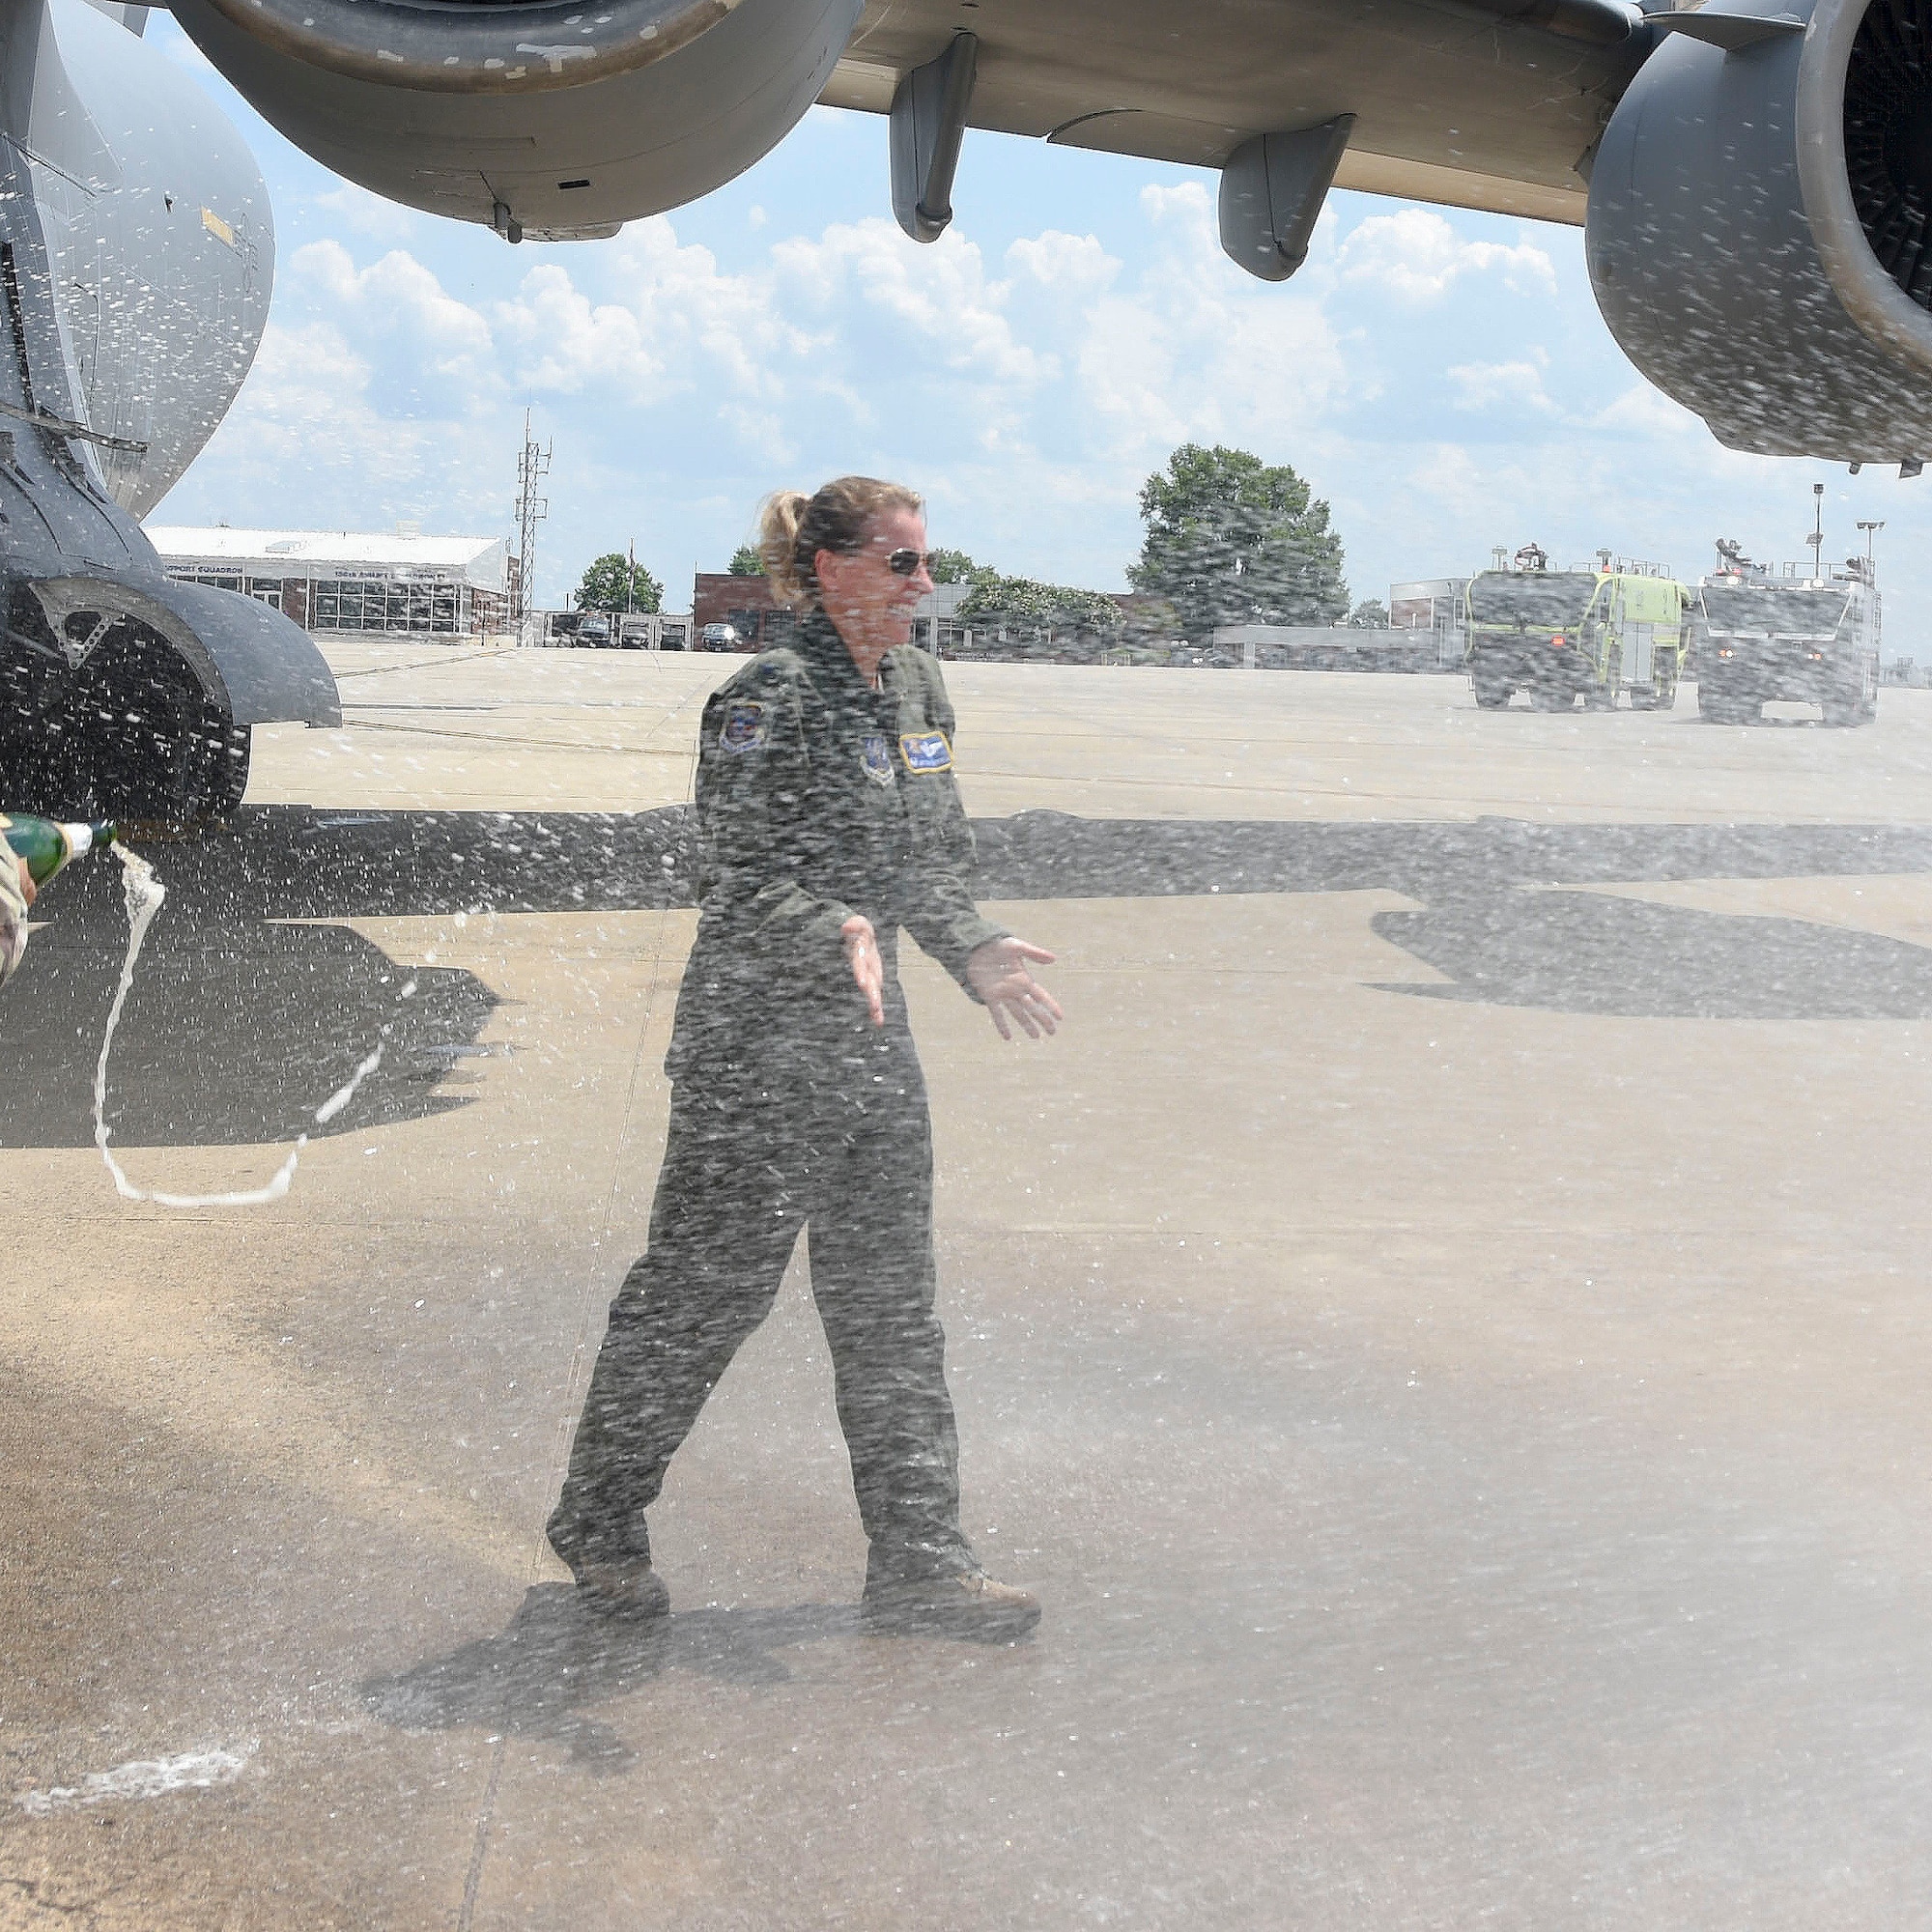 U.S. Air Force Colonel Bryony Terrell, 145th Airlift Wing Commander, is greeted at the completion of her Fini Flight on July 14, 2020, at the North Carolina Air National Guard Base, Charlotte-Douglas International Airport. Colonel Terrell relinquishes Command on August 1, 2020, after leading the Airmen of the 145th Airlift Wing through their transition in mission from C – 130 Hercules to C 17 Globemaster aircraft.